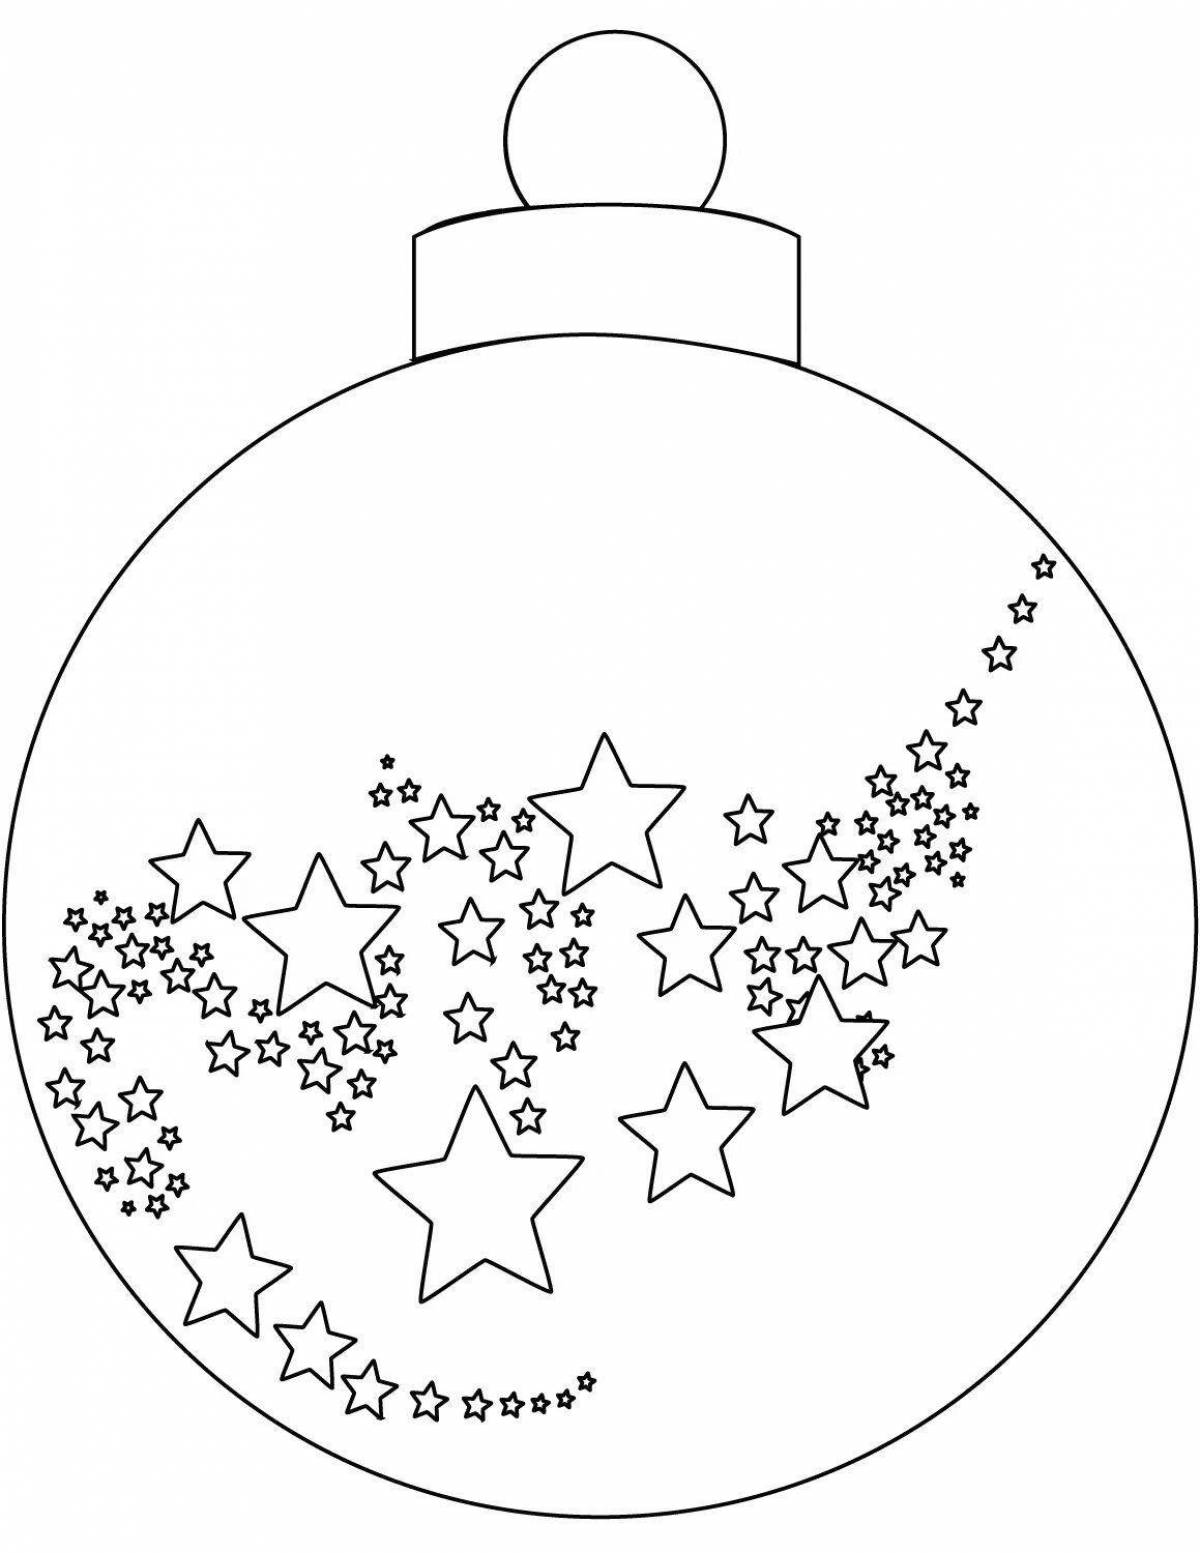 Gorgeous Christmas toy ball coloring book